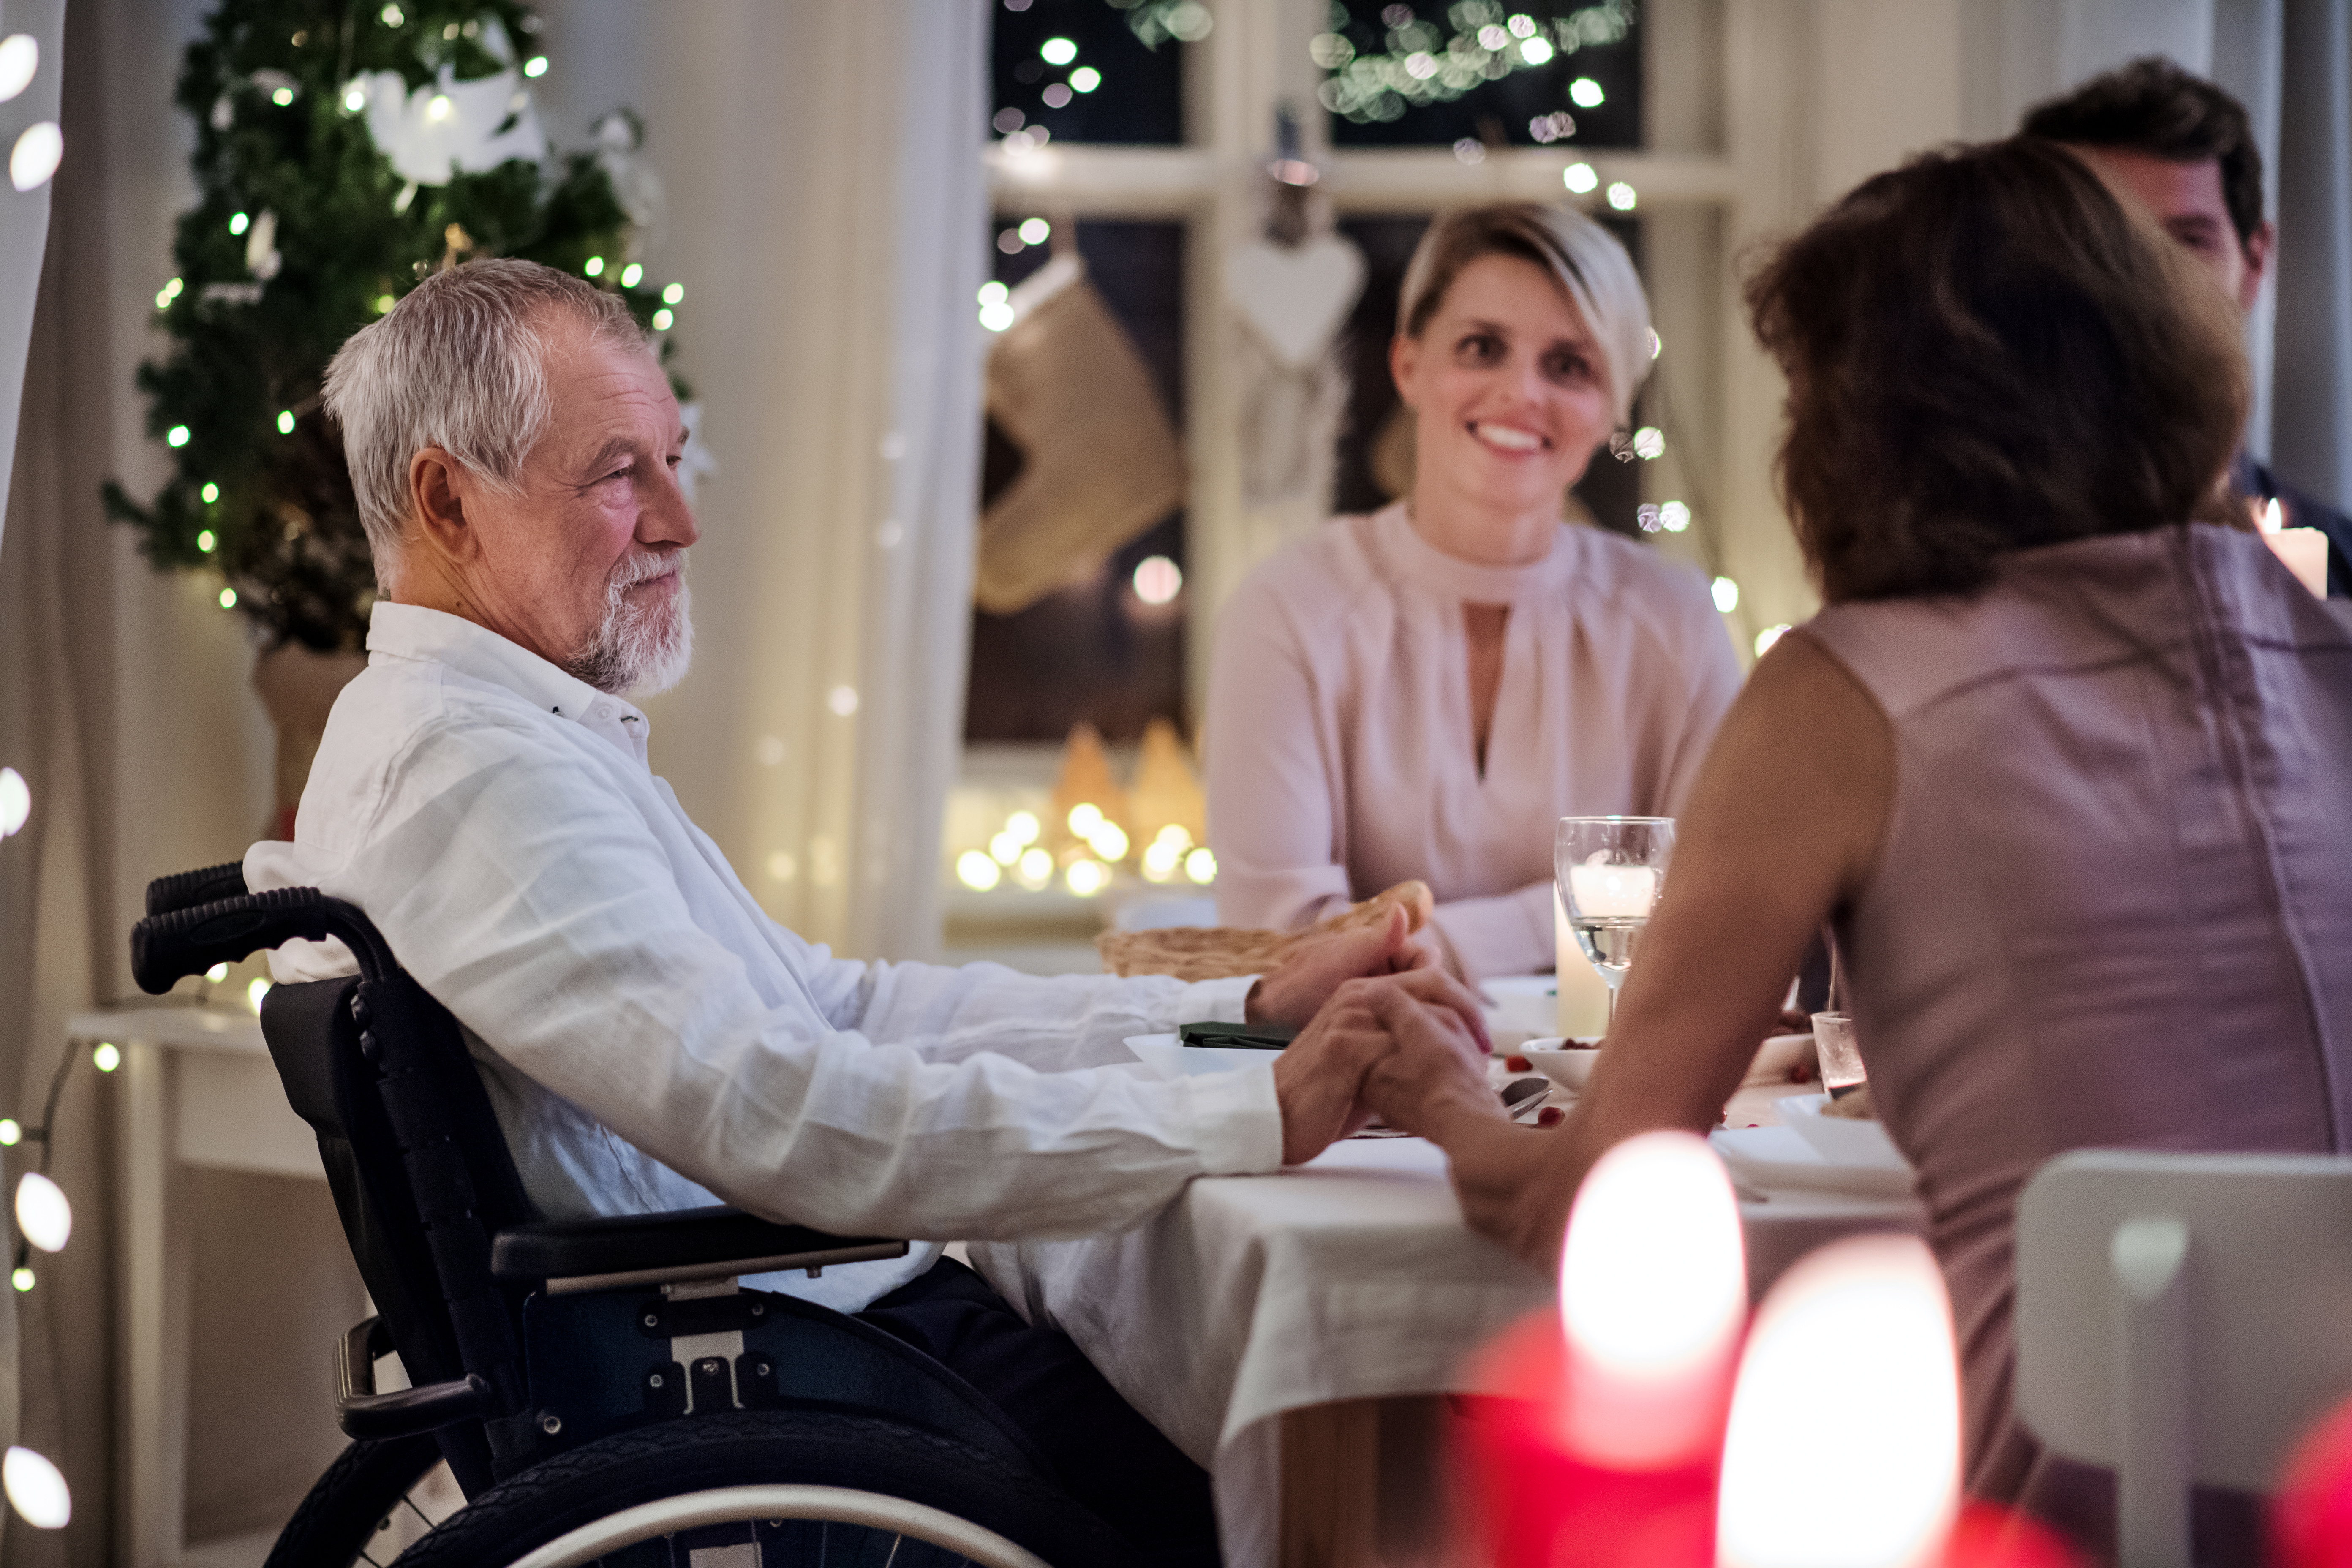 "A man with white hair and a beard sits in a wheelchair at a dinner table and holds with a woman sitting next to him who is speaking to other people sitting with them in a home decorated for Christmas"